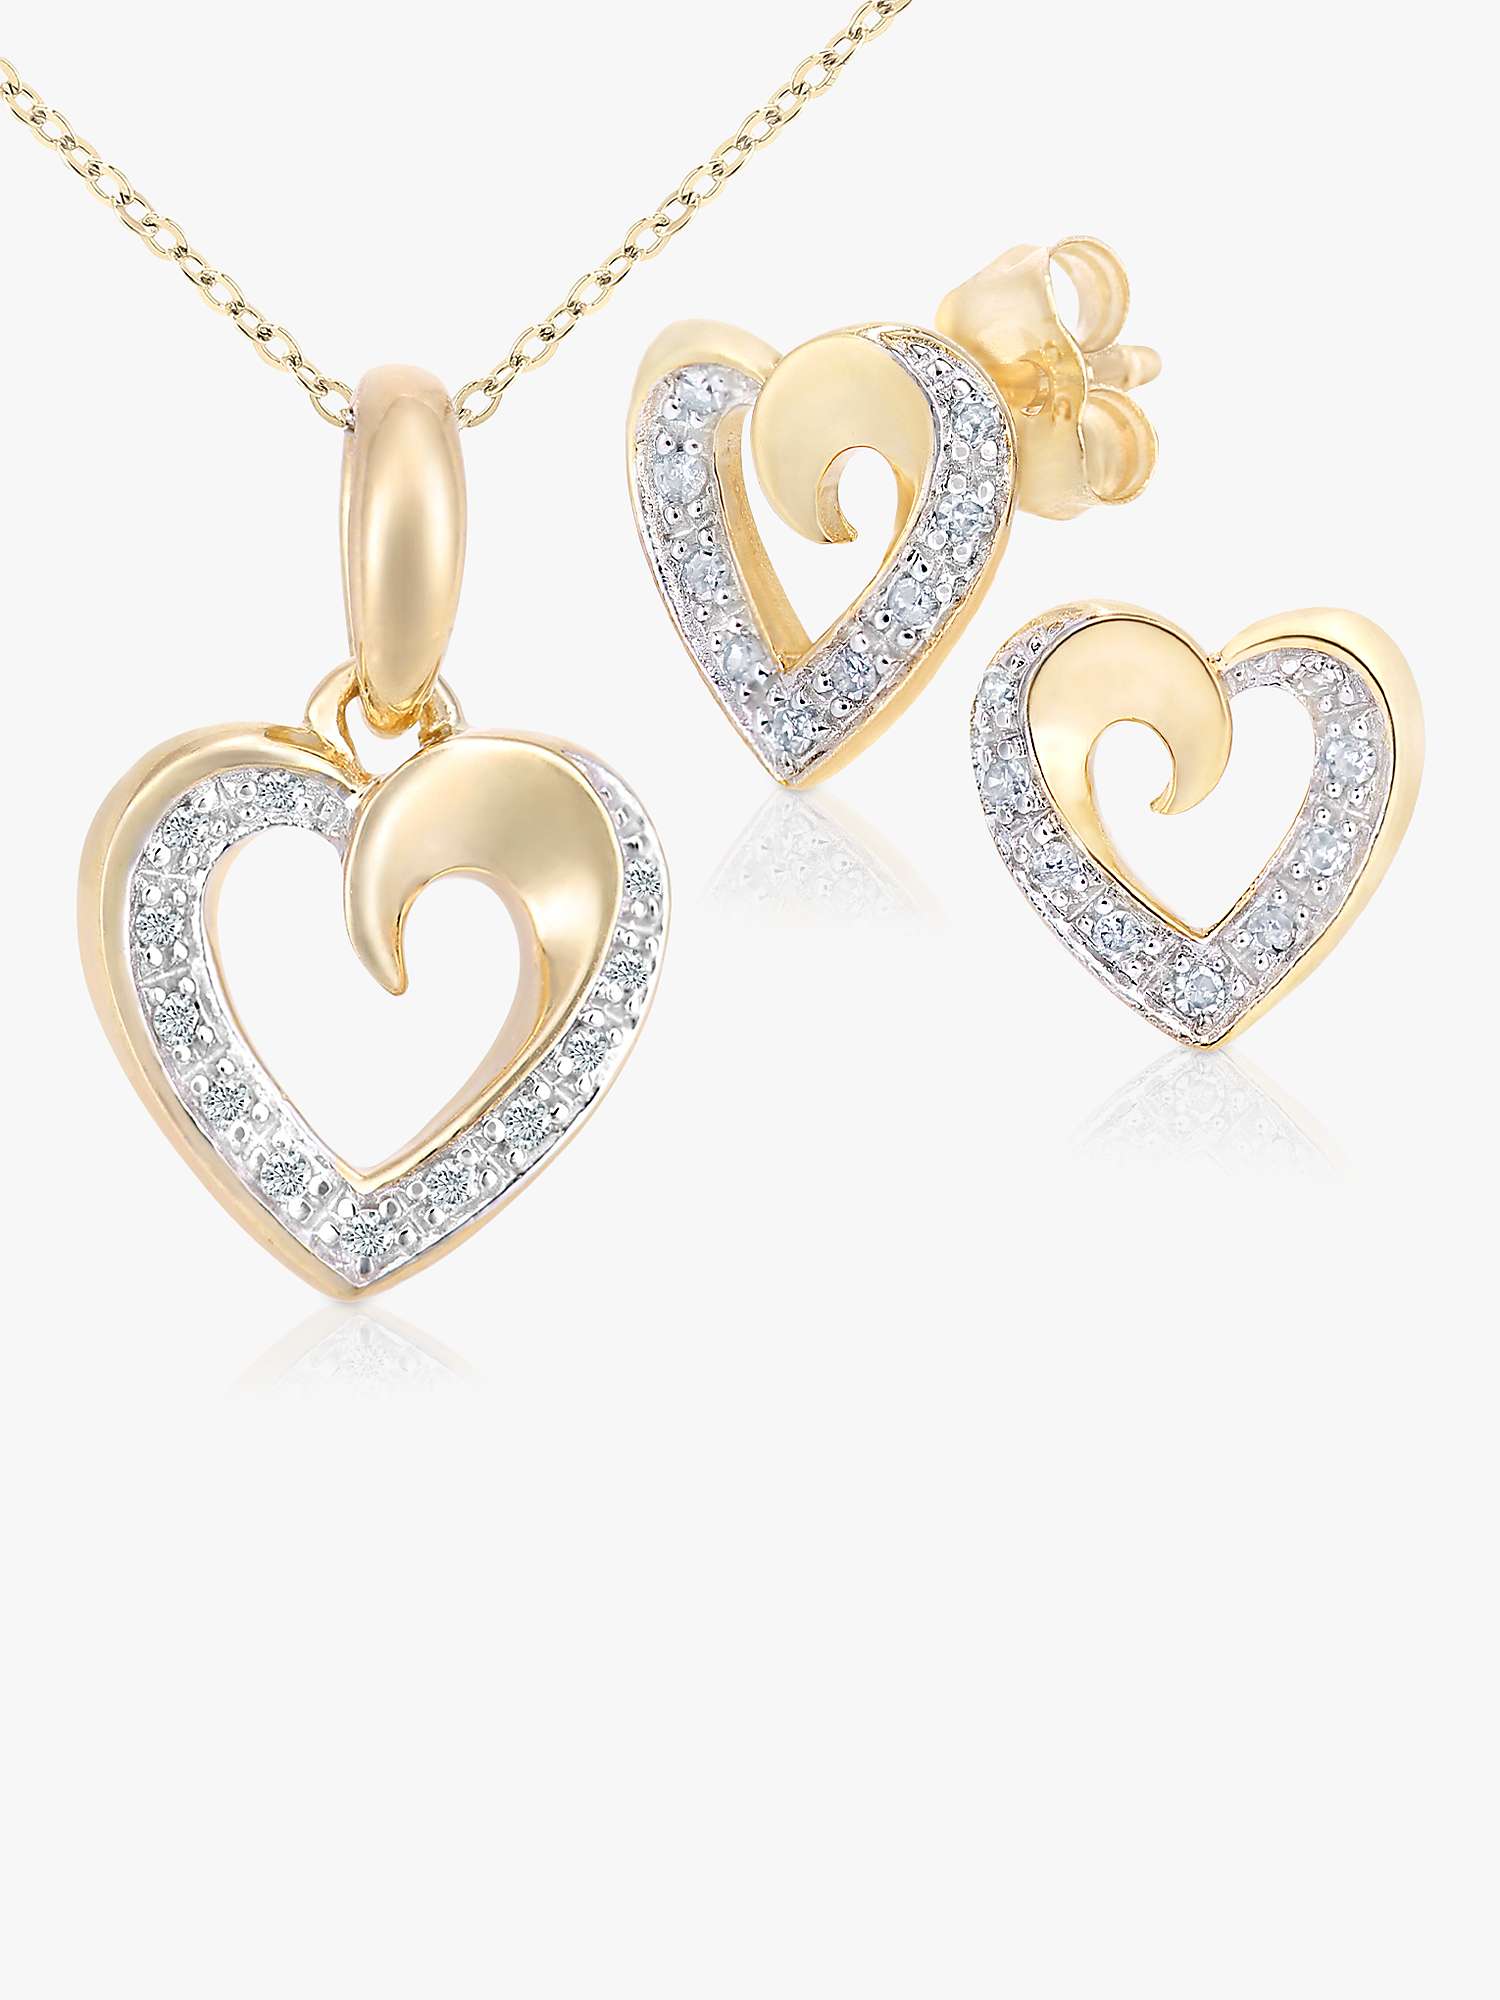 Buy Mogul 9ct Yellow Gold Diamond Heart Necklace and Earrings Jewellery Set, Gold Online at johnlewis.com